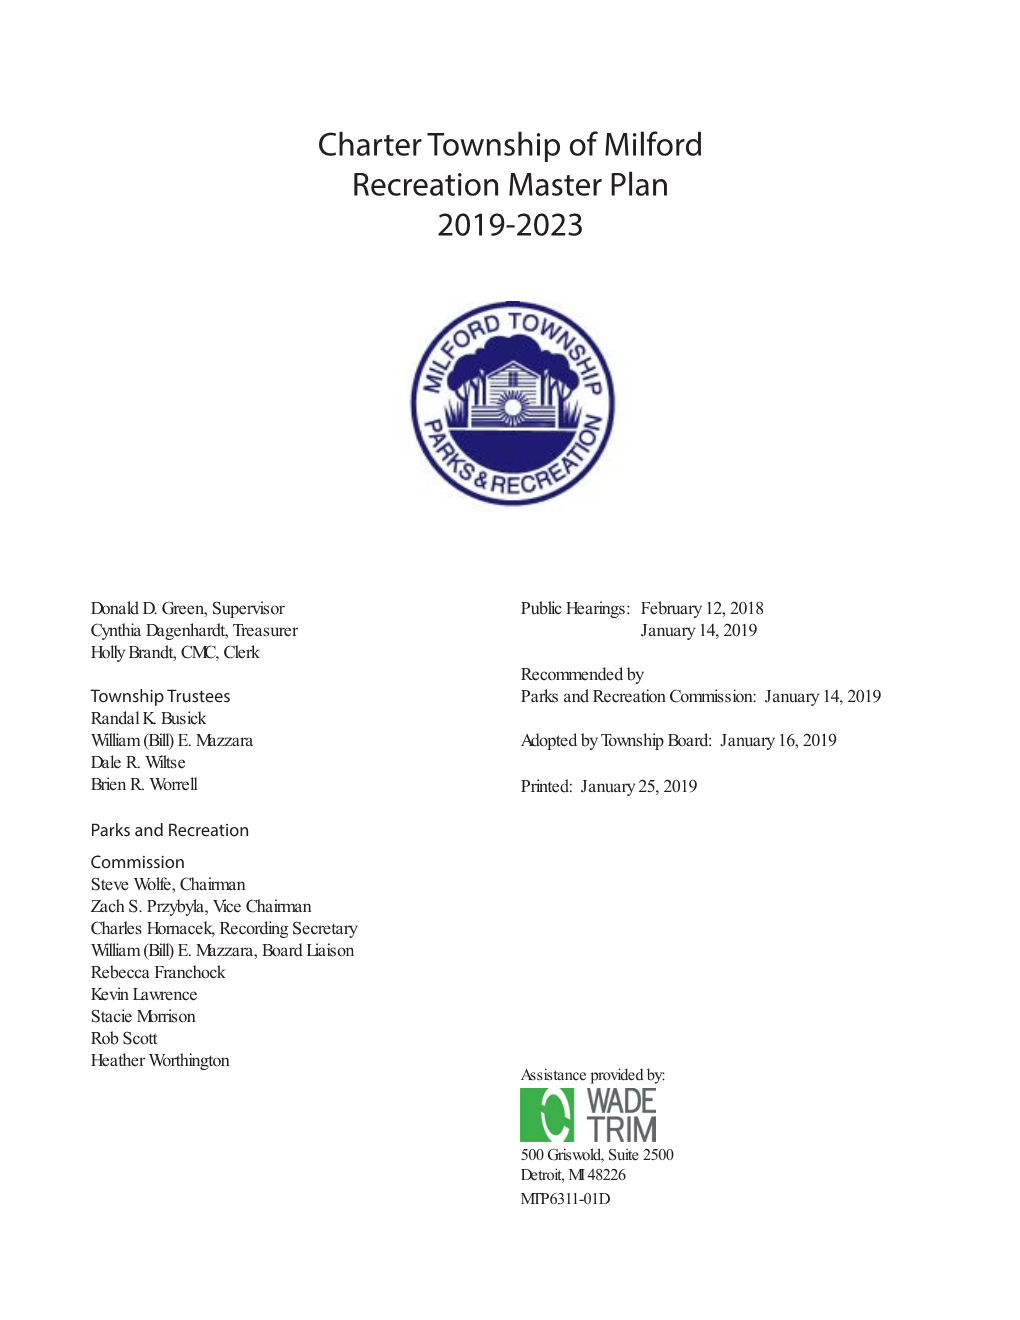 Charter Township of Milford Recreation Master Plan 2019-2023